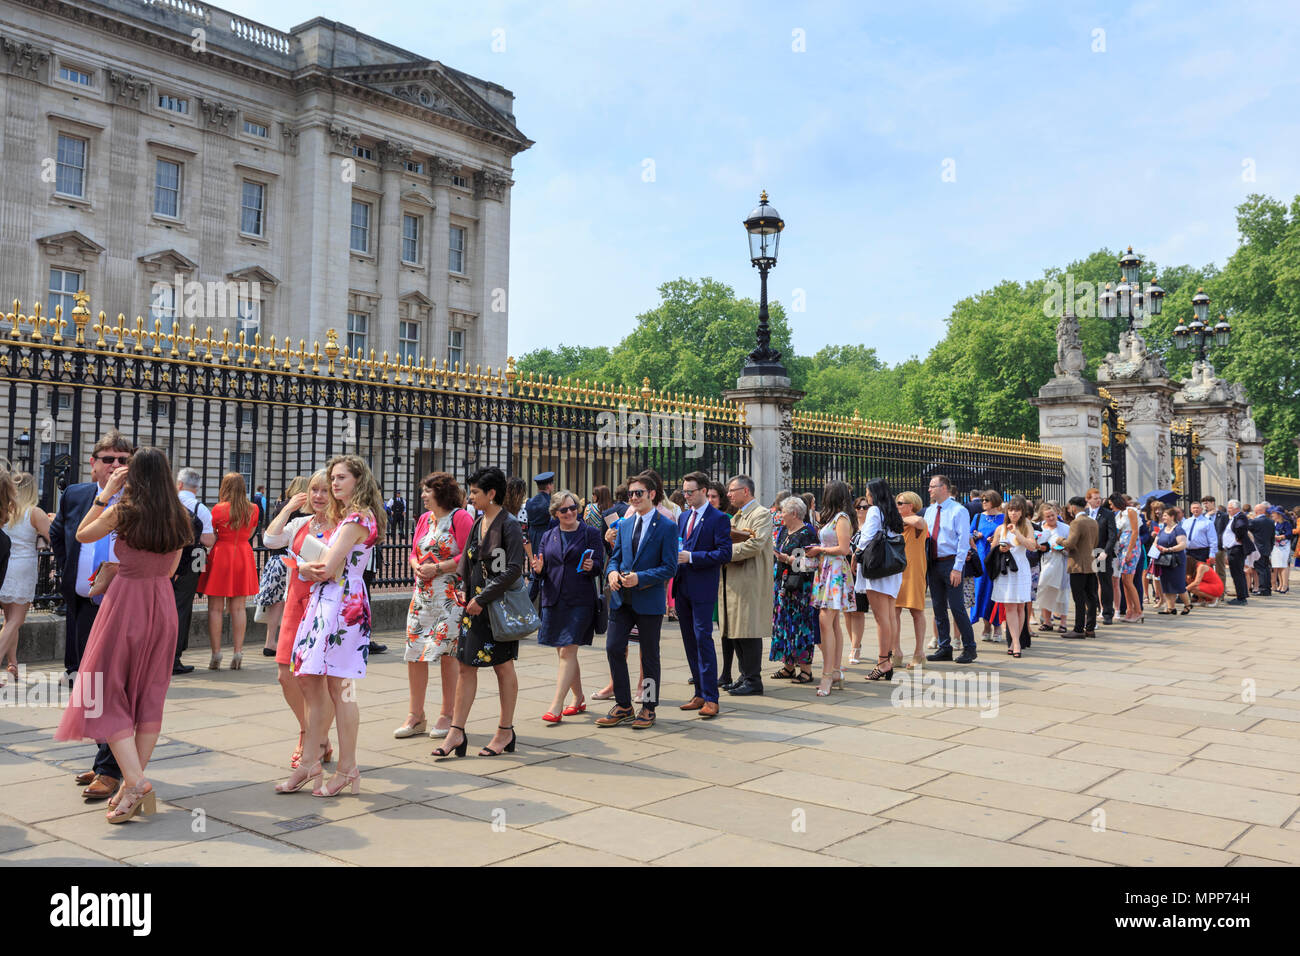 Buckingham Palace, London, 24th May 2018. People queuing to enter the Palace for the The Duke of Edinburgh's Awards at Buckingham Palace. The Awards are a youth awards programme founded in the United Kingdom in 1956 by Prince Philip, Duke of Edinburgh, to recognise adolescents and young adults for completing a series of self-improvement exercises. Credit: Imageplotter News and Sports/Alamy Live News Stock Photo